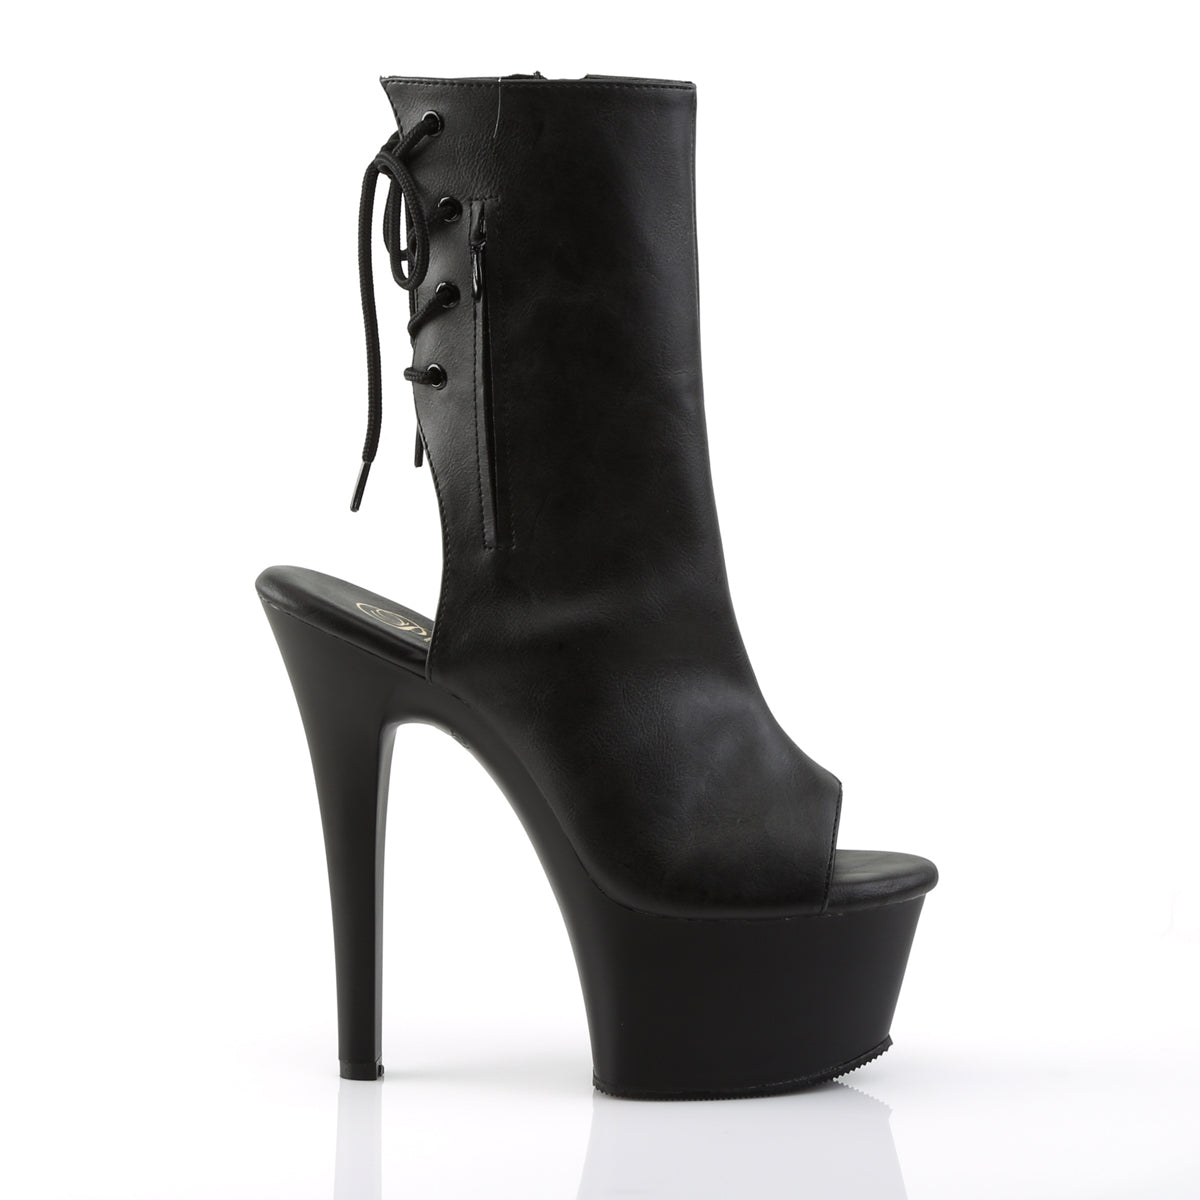 ASPIRE-1018 Pleasers 6 Inch Heel Black Fetish Ankle Boots-Pleaser- Sexy Shoes Fetish Heels